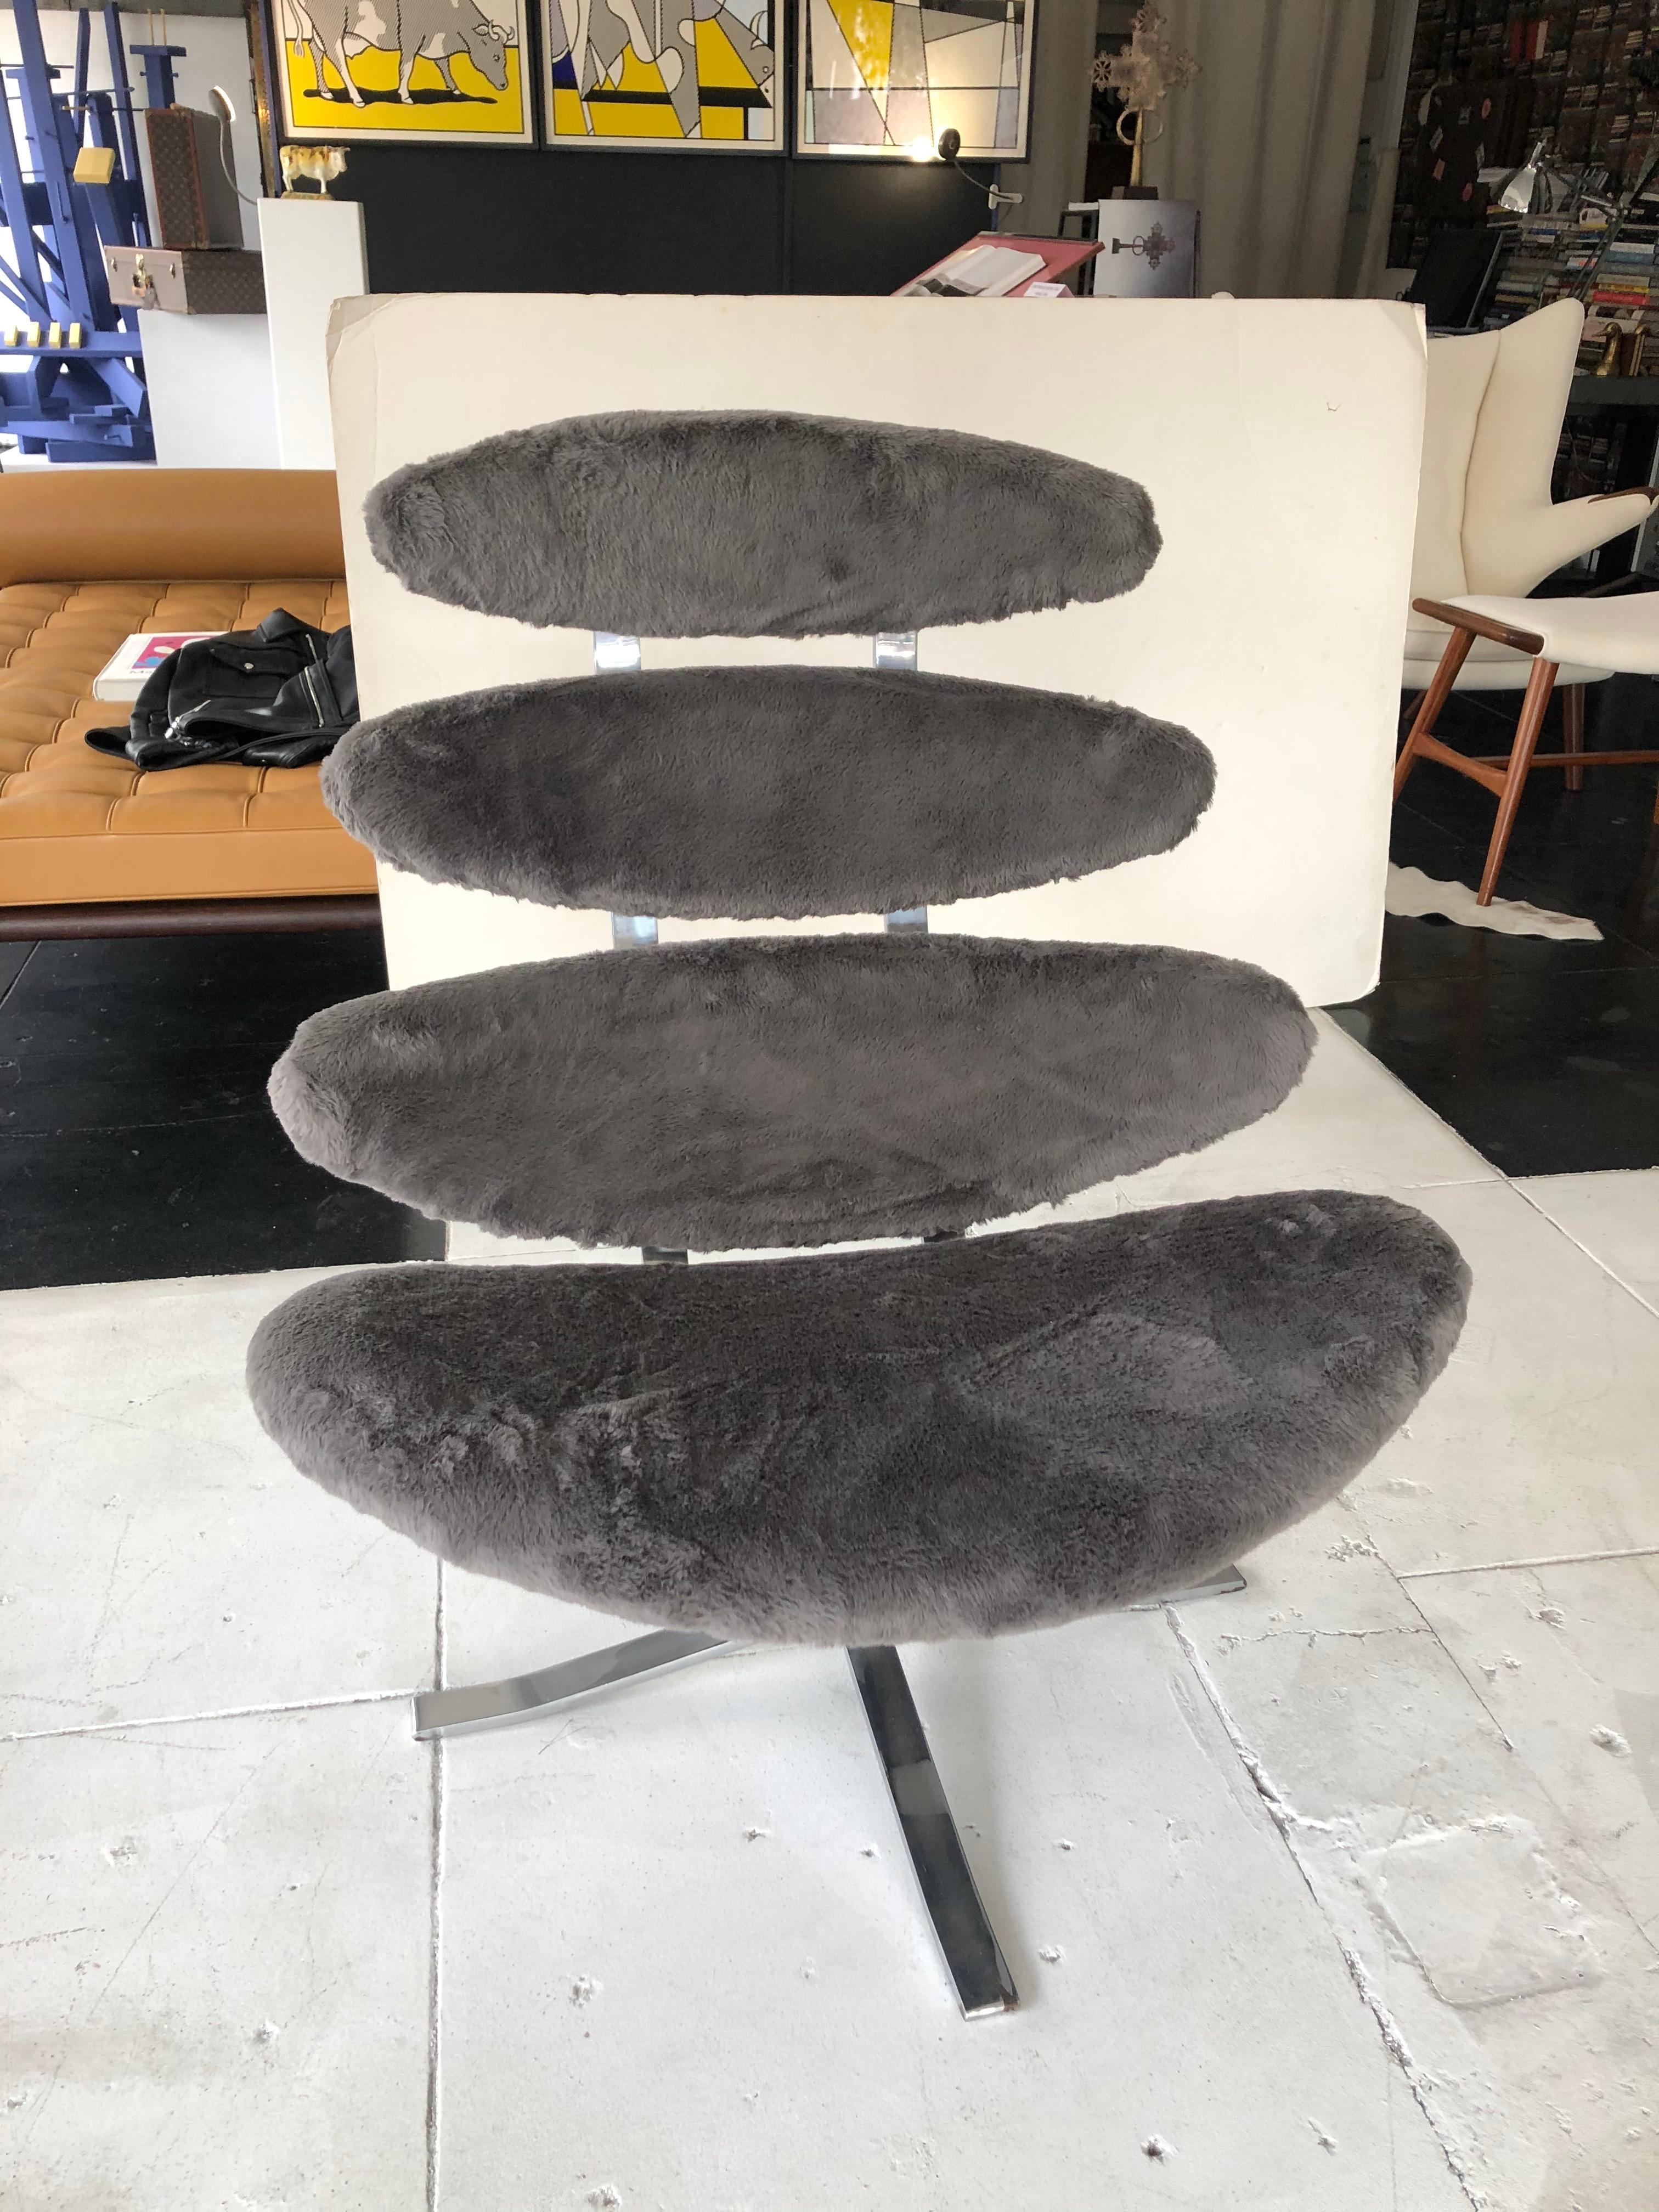 Beautiful EJ5 Corona chair by Poul Volther for Erik Jorgensen. Upholstered in charcoal color shearling fabric, Denmark, 1960s.